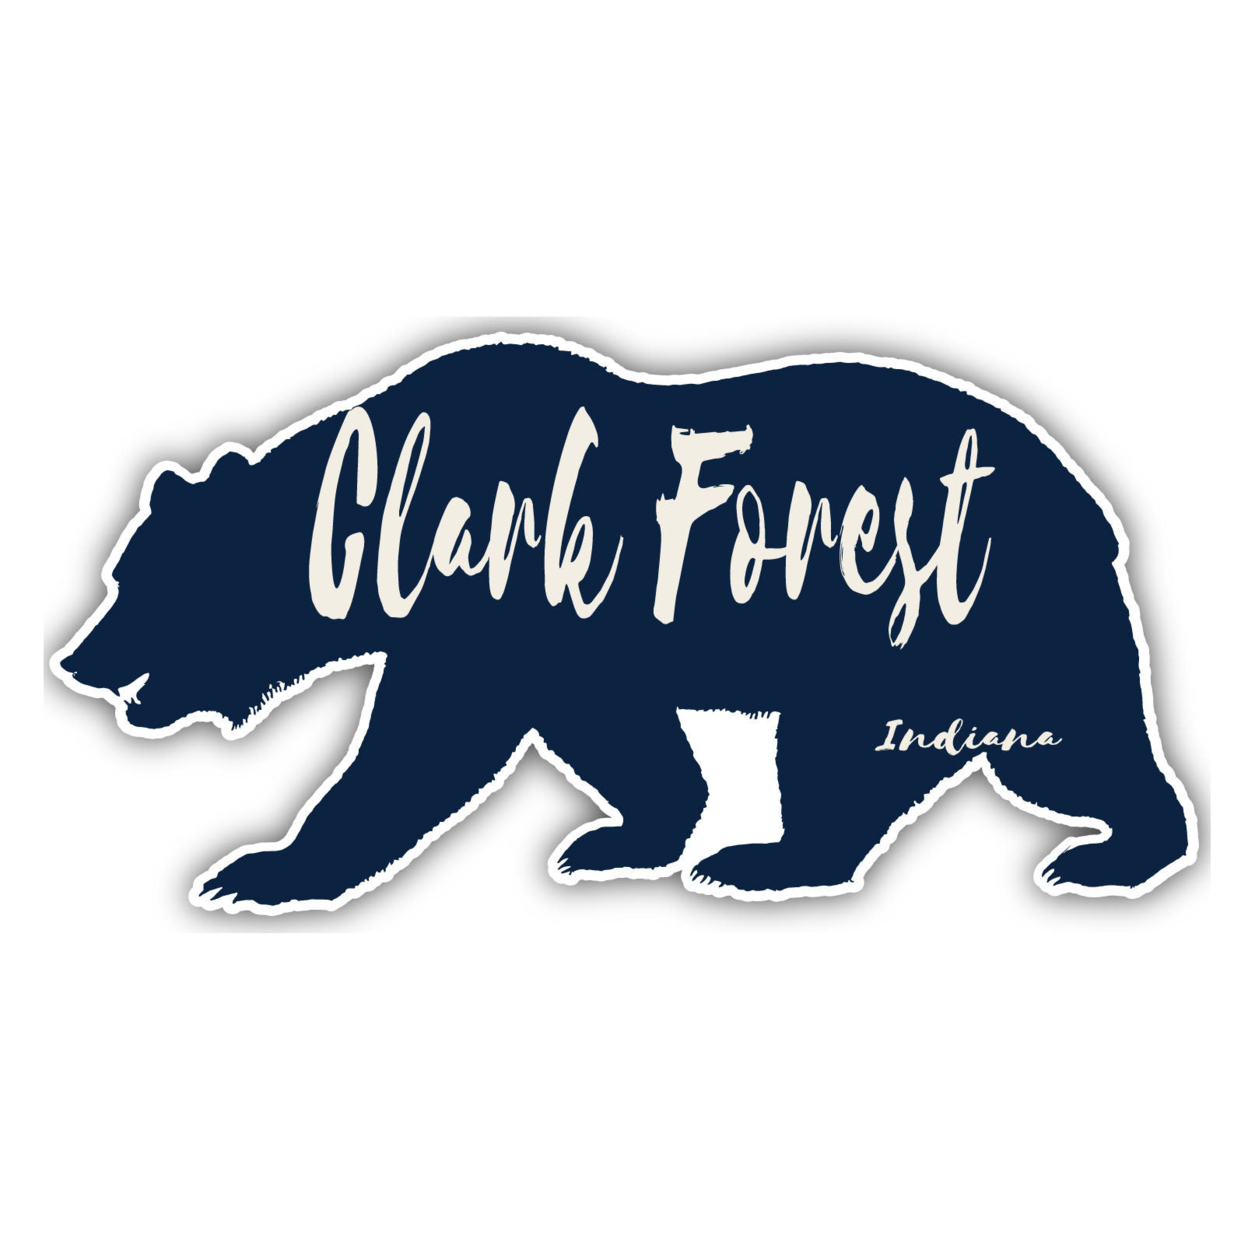 Clark Forest Indiana Souvenir Decorative Stickers (Choose Theme And Size) - 4-Pack, 2-Inch, Bear